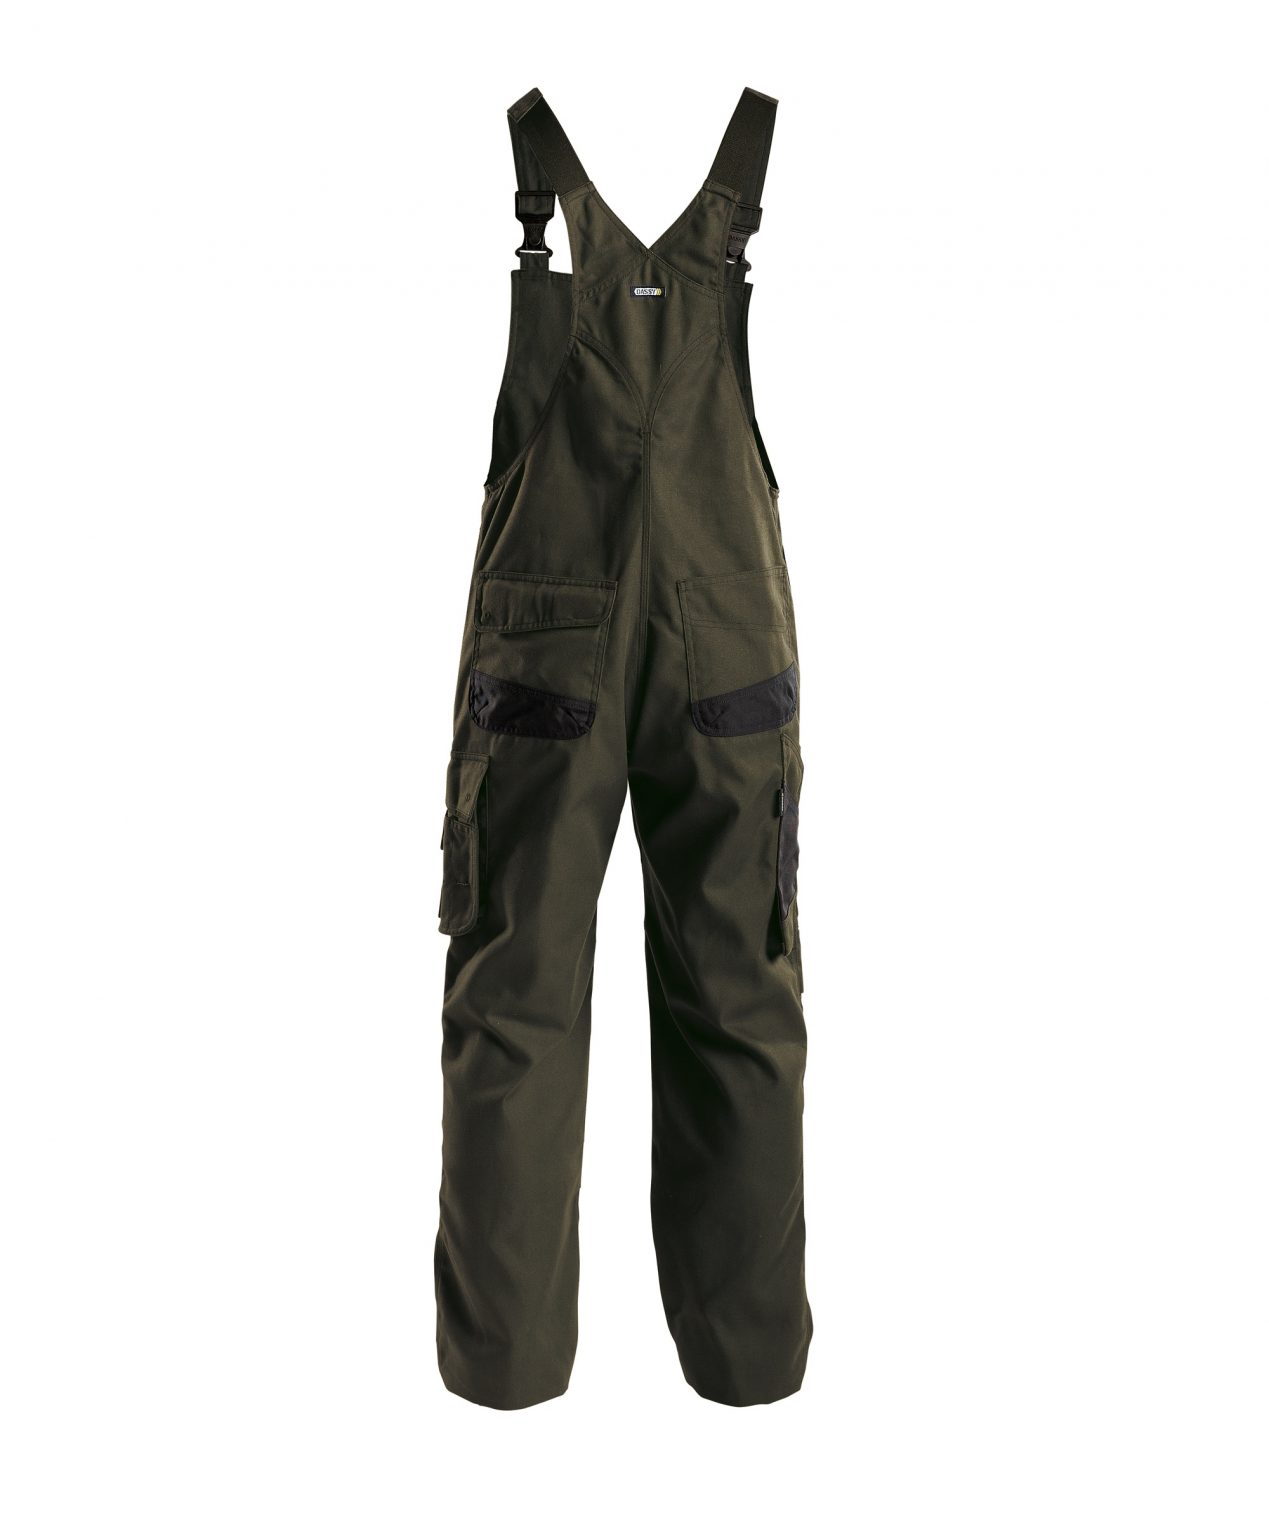 bolt canvas brace overall with knee pockets olive green black back